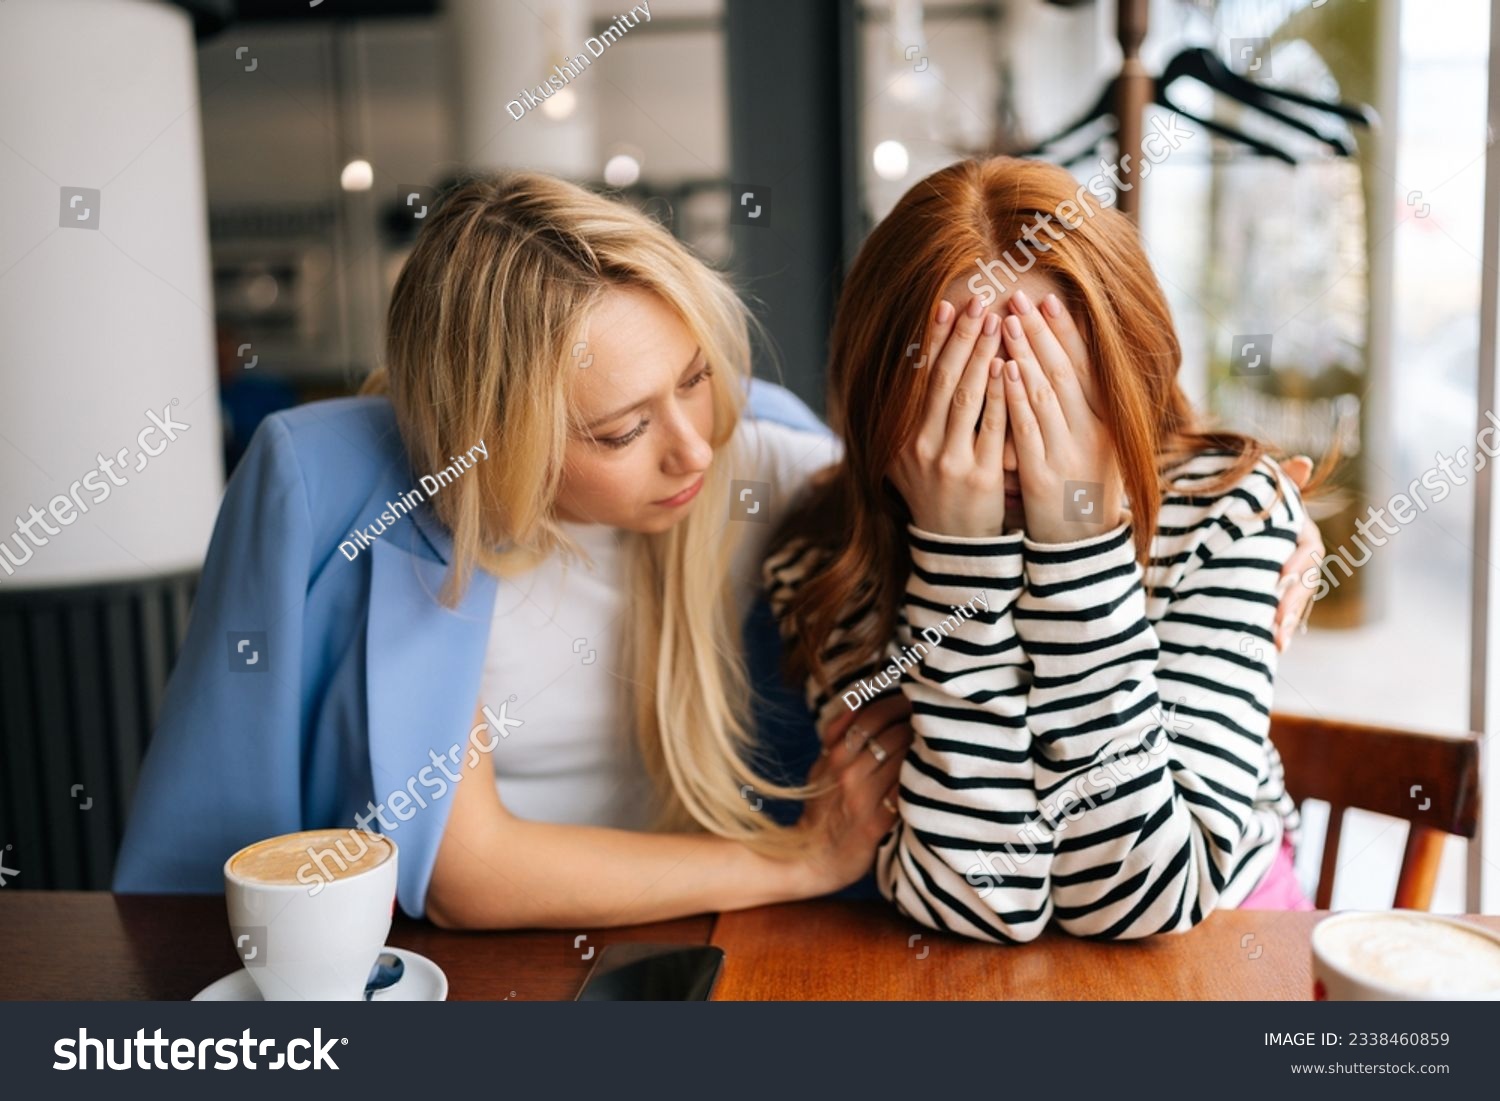 Portrait of displeased young woman and best female friend trying to comfort and cheer up sitting together in cafe by window. Unhappy redhead lady covering face with hands and crying. #2338460859